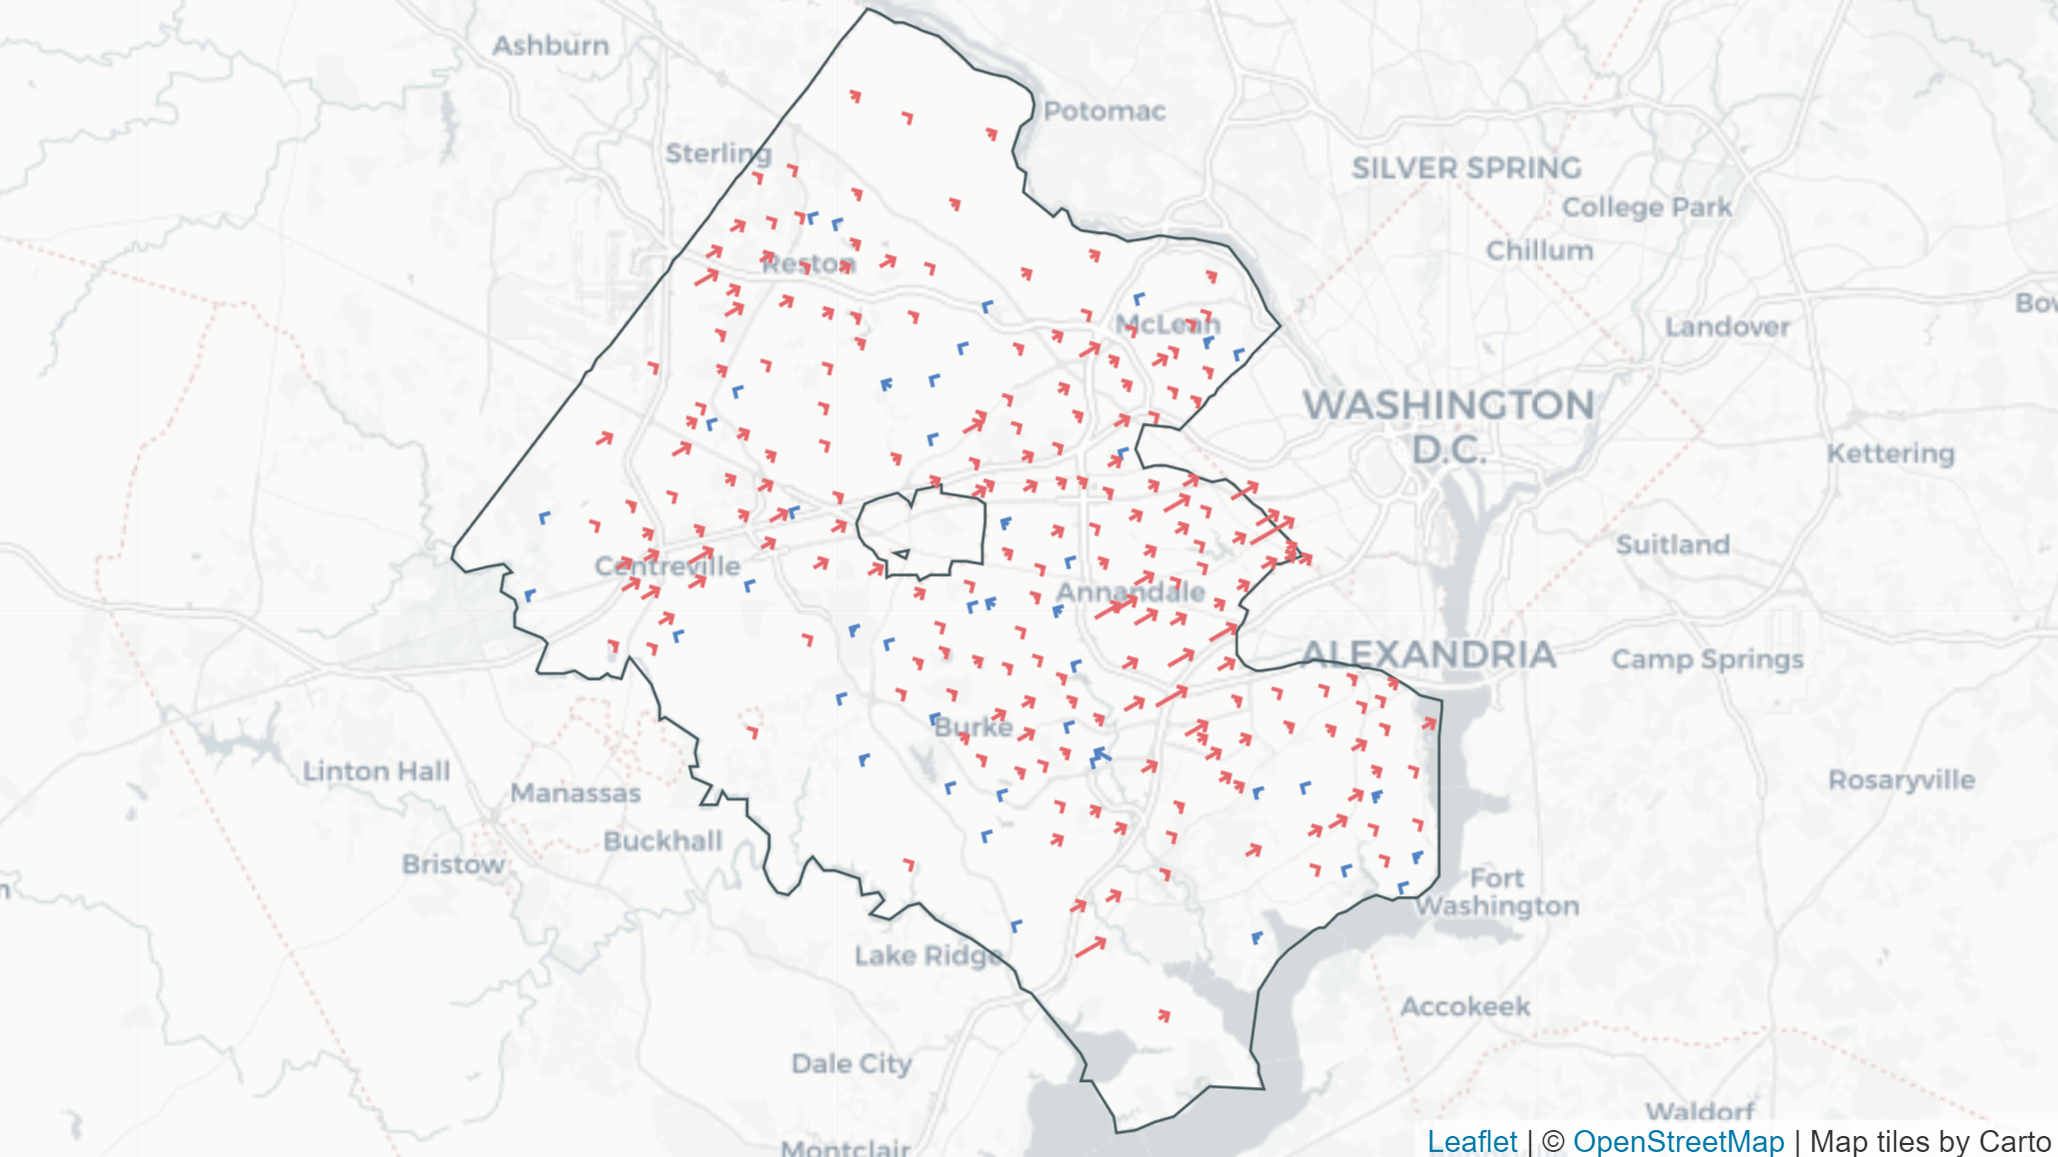 VPAP: Significant Republican Gains in Fairfax County